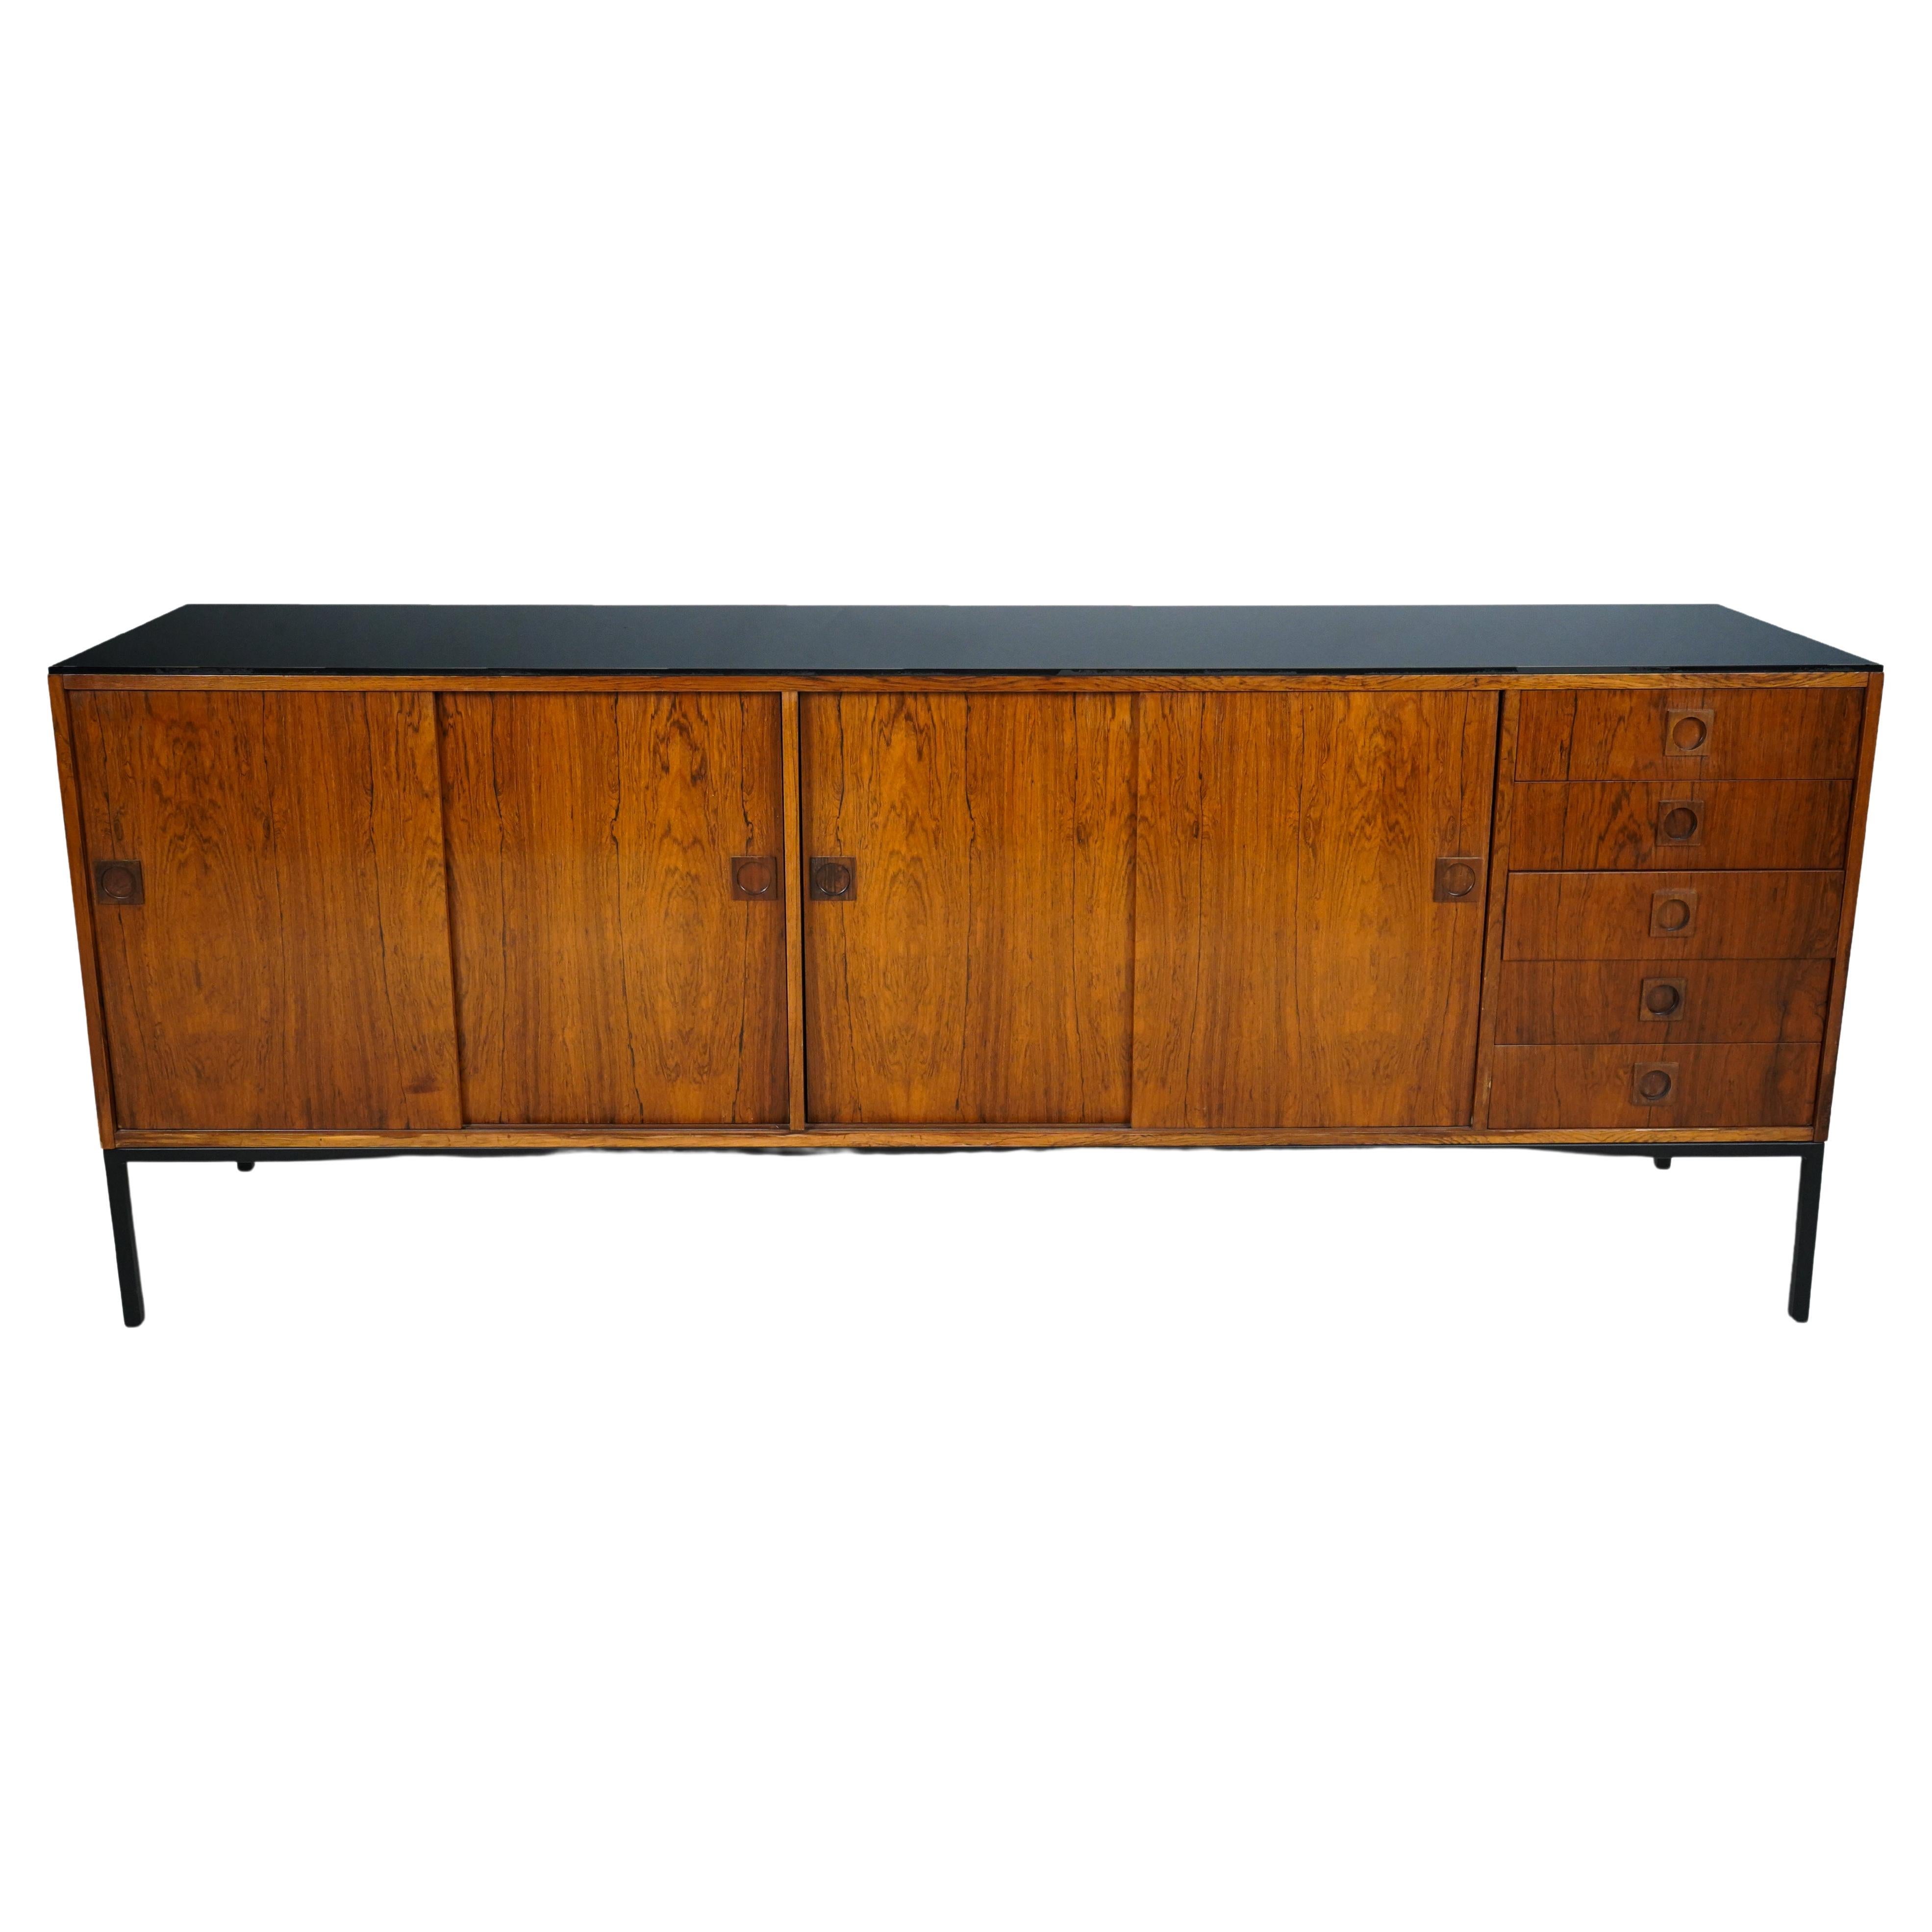 Danish Walnut Sideboard with Four Doors and Metal Legs